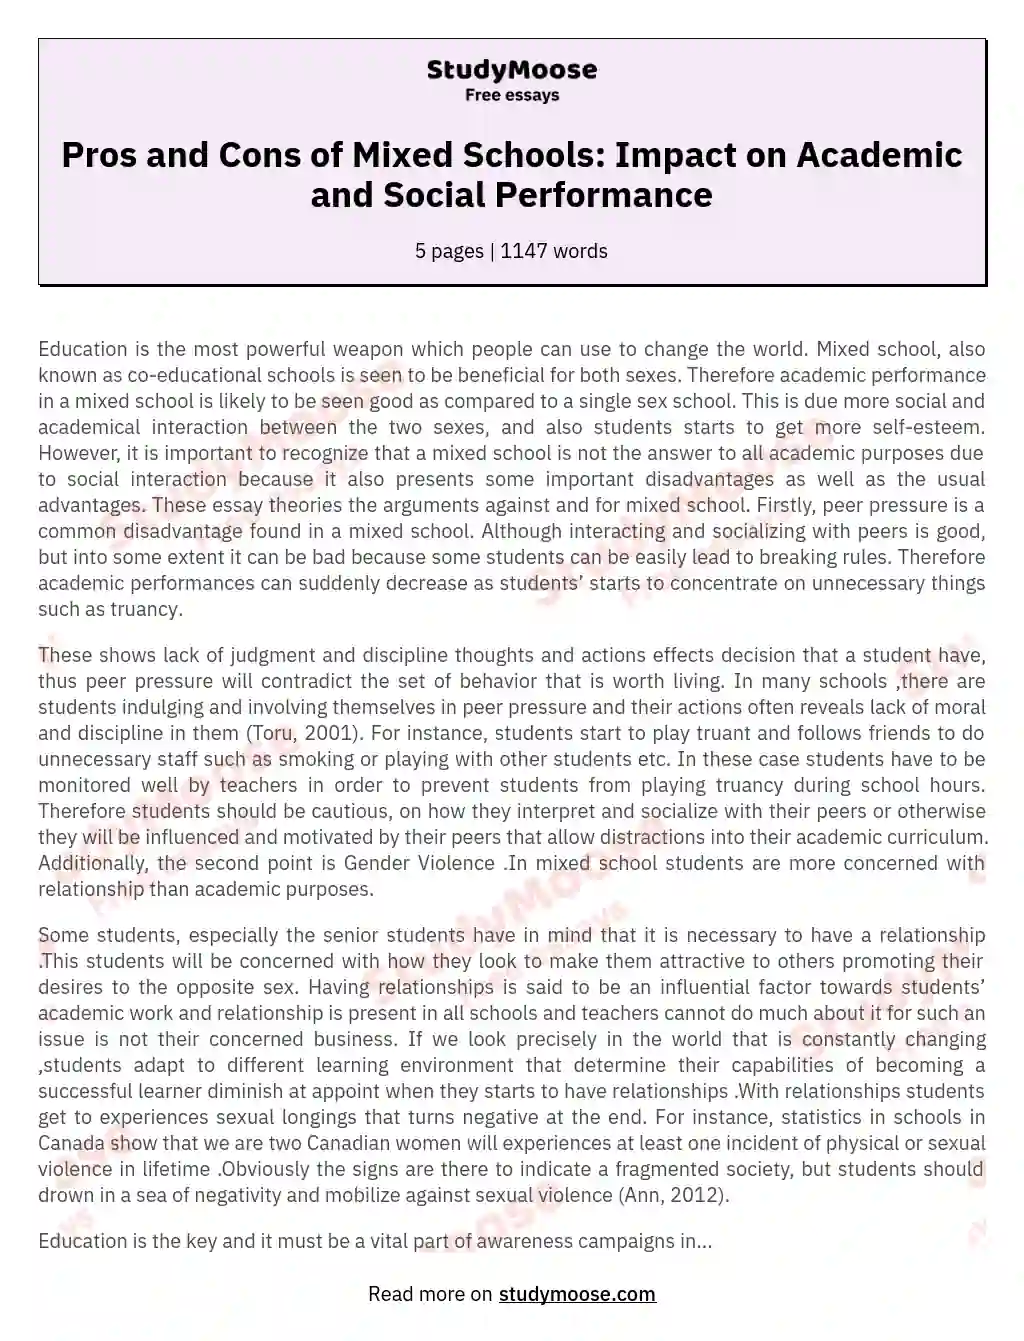 Pros and Cons of Mixed Schools: Impact on Academic and Social Performance essay